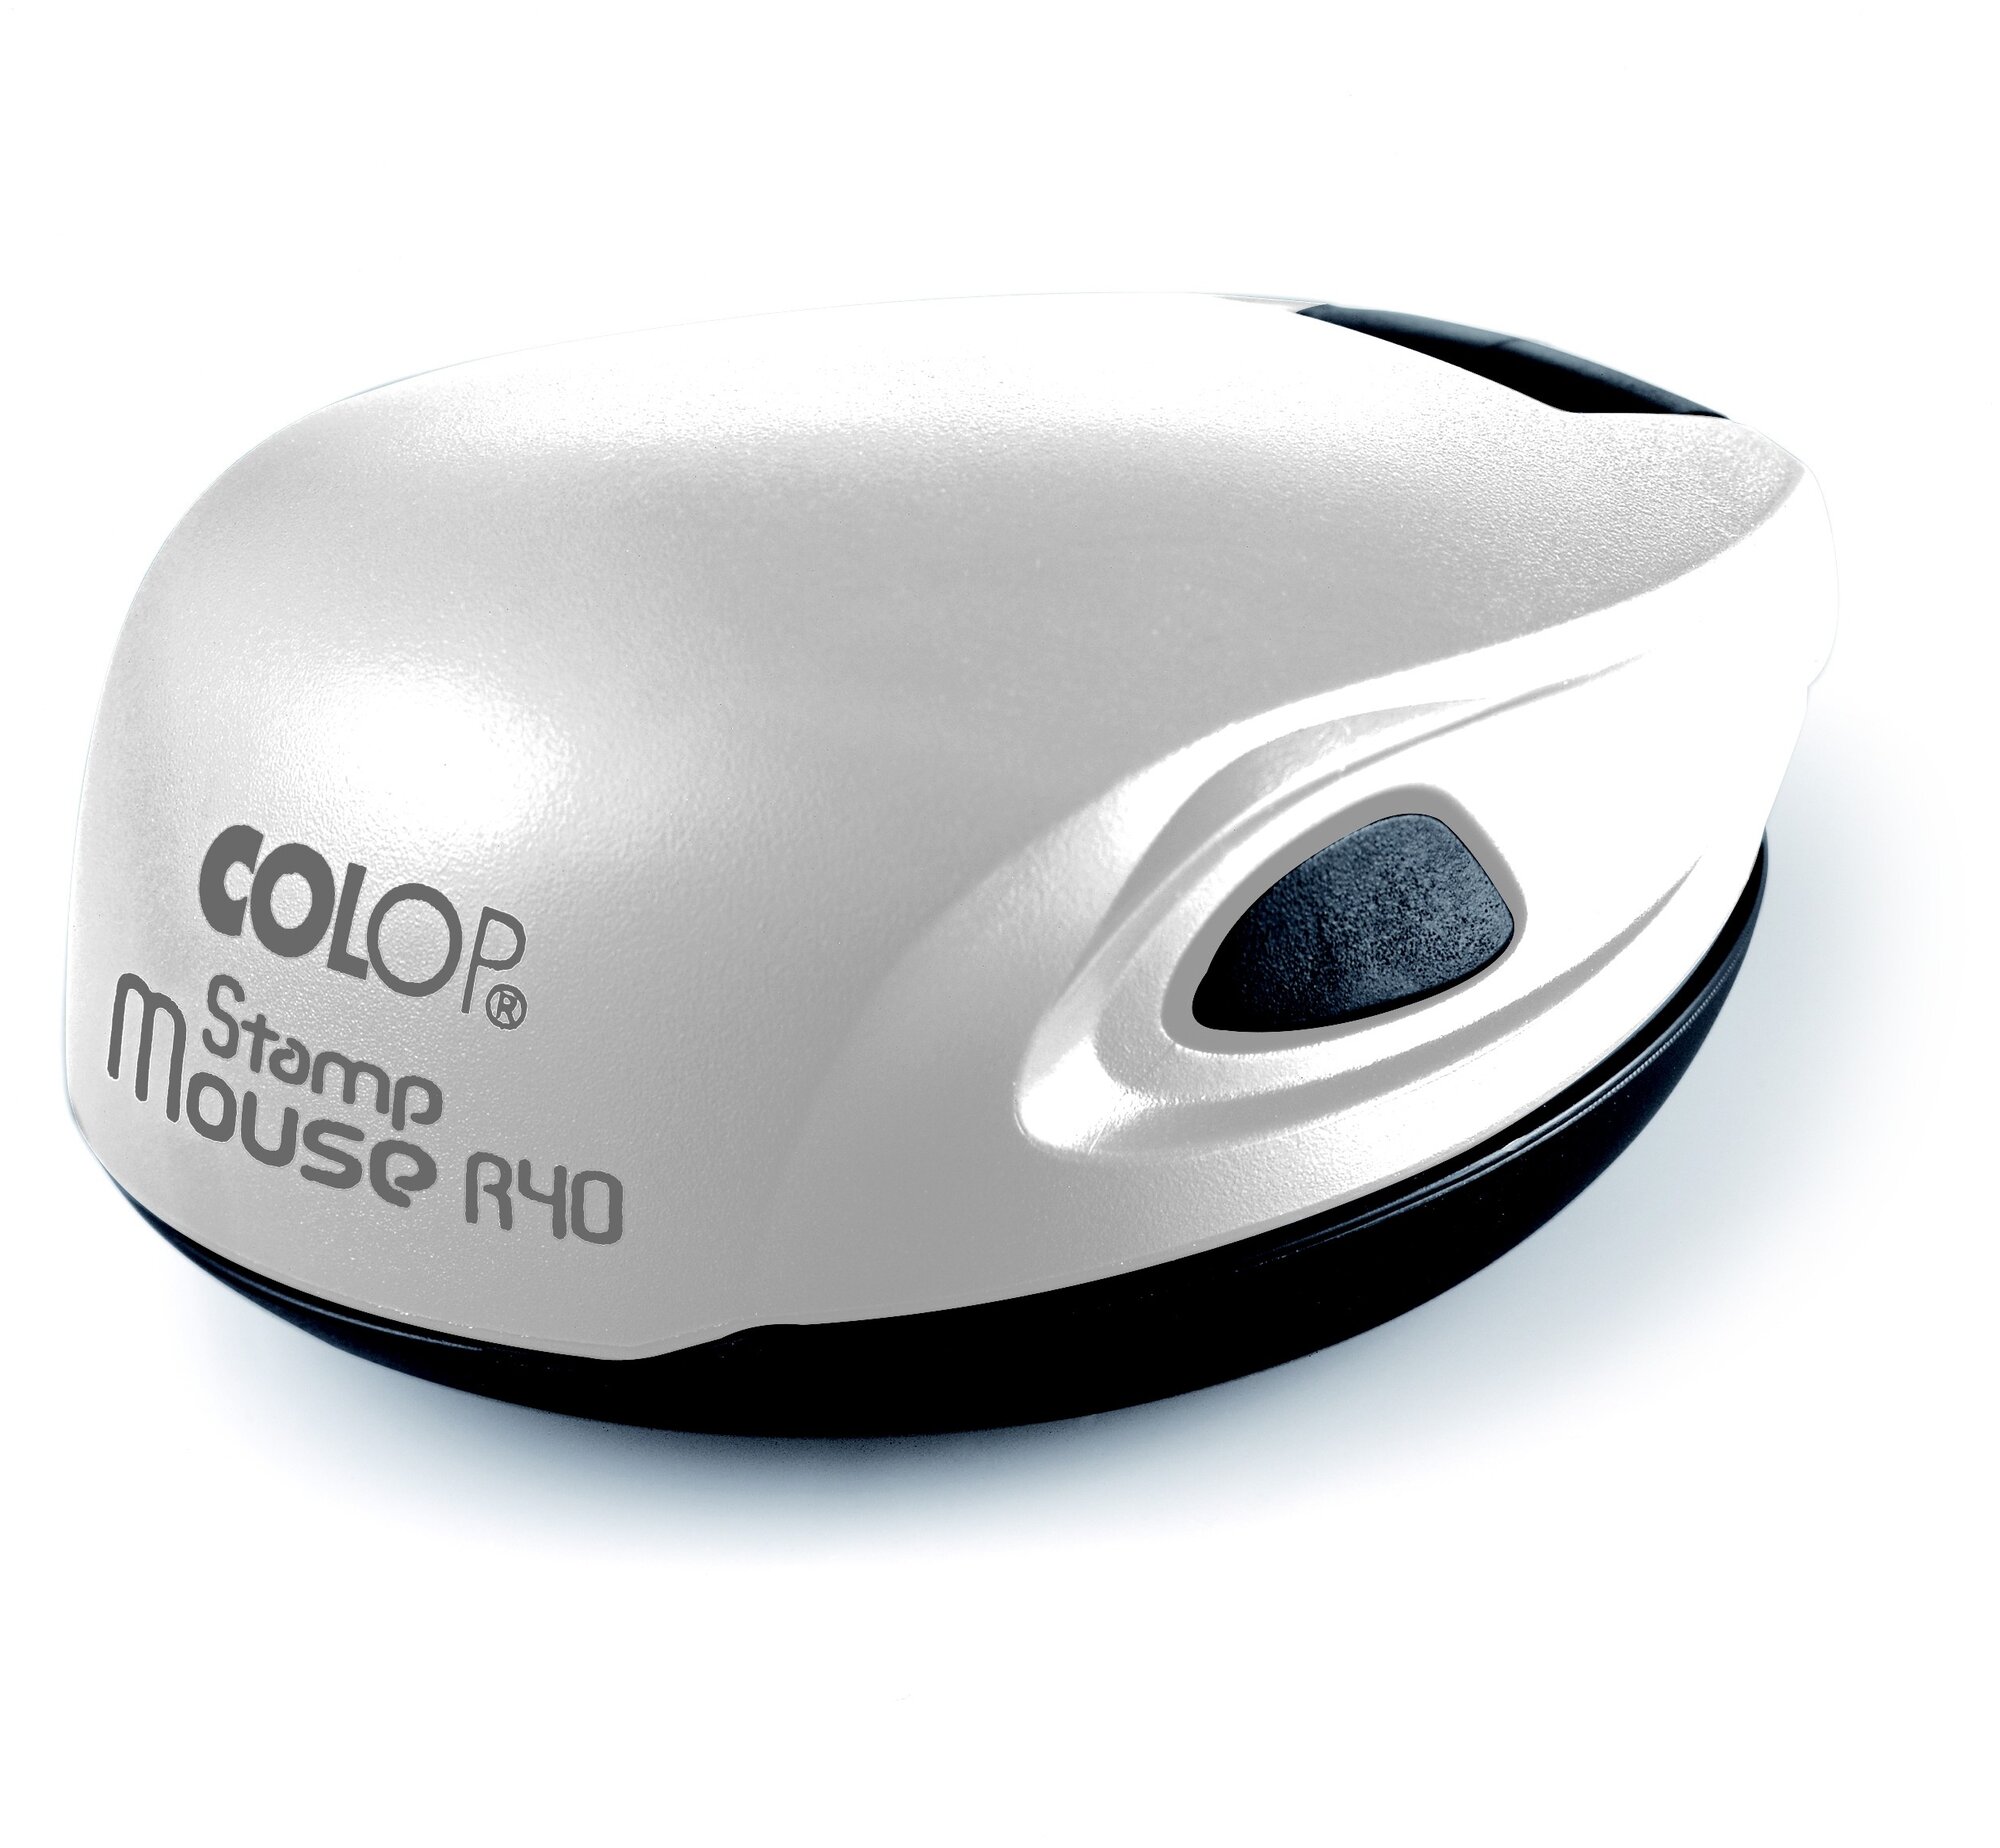 Оснастка COLOP Stamp Mouse R40 круглая